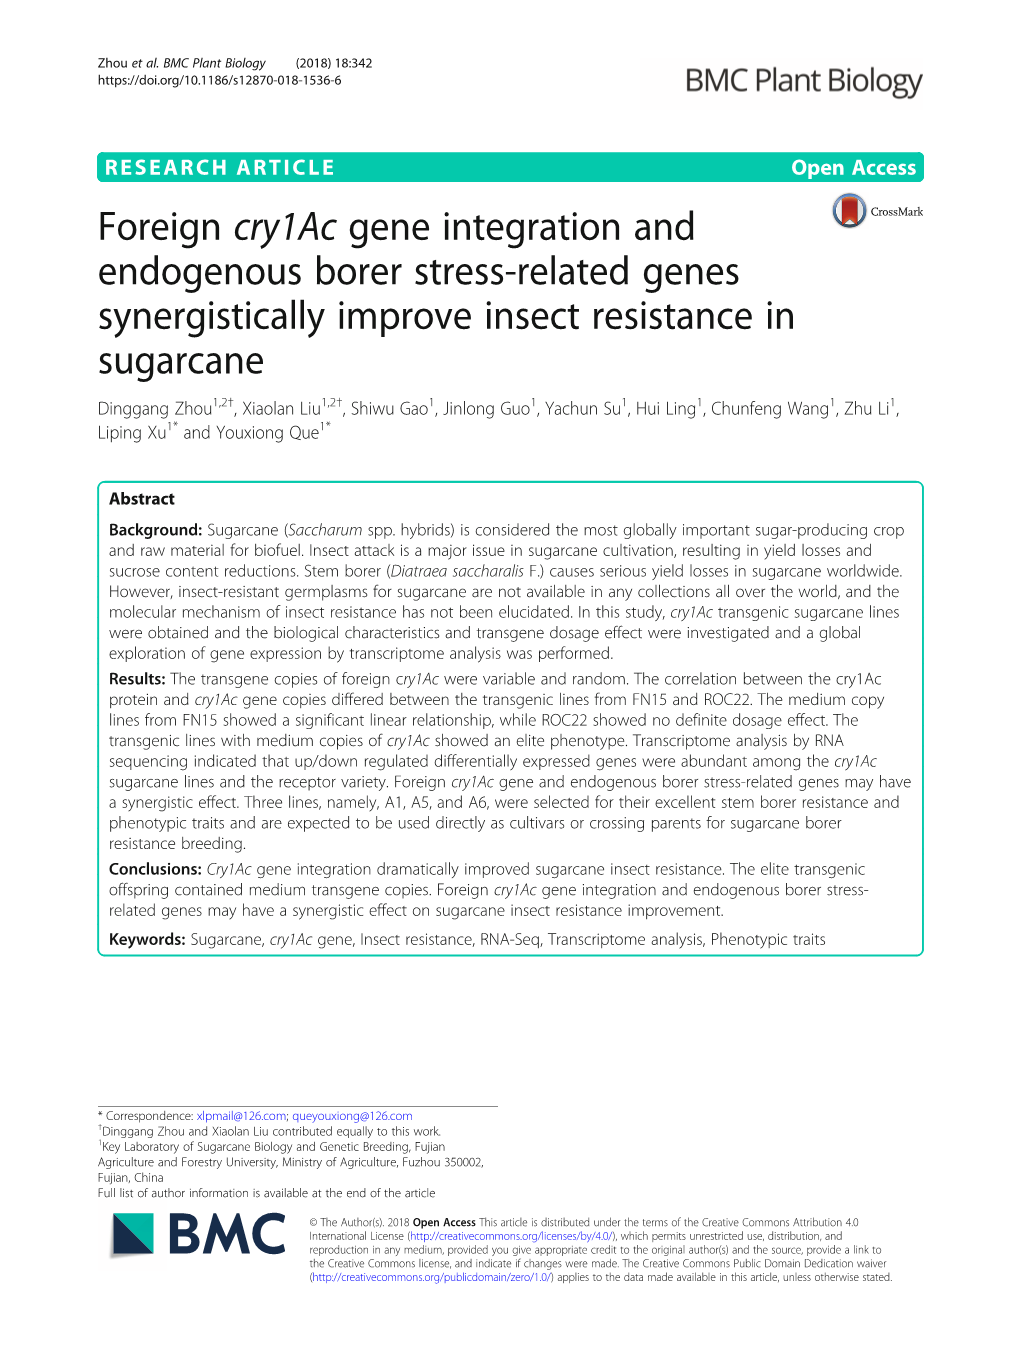 Foreign Cry1ac Gene Integration and Endogenous Borer Stress-Related